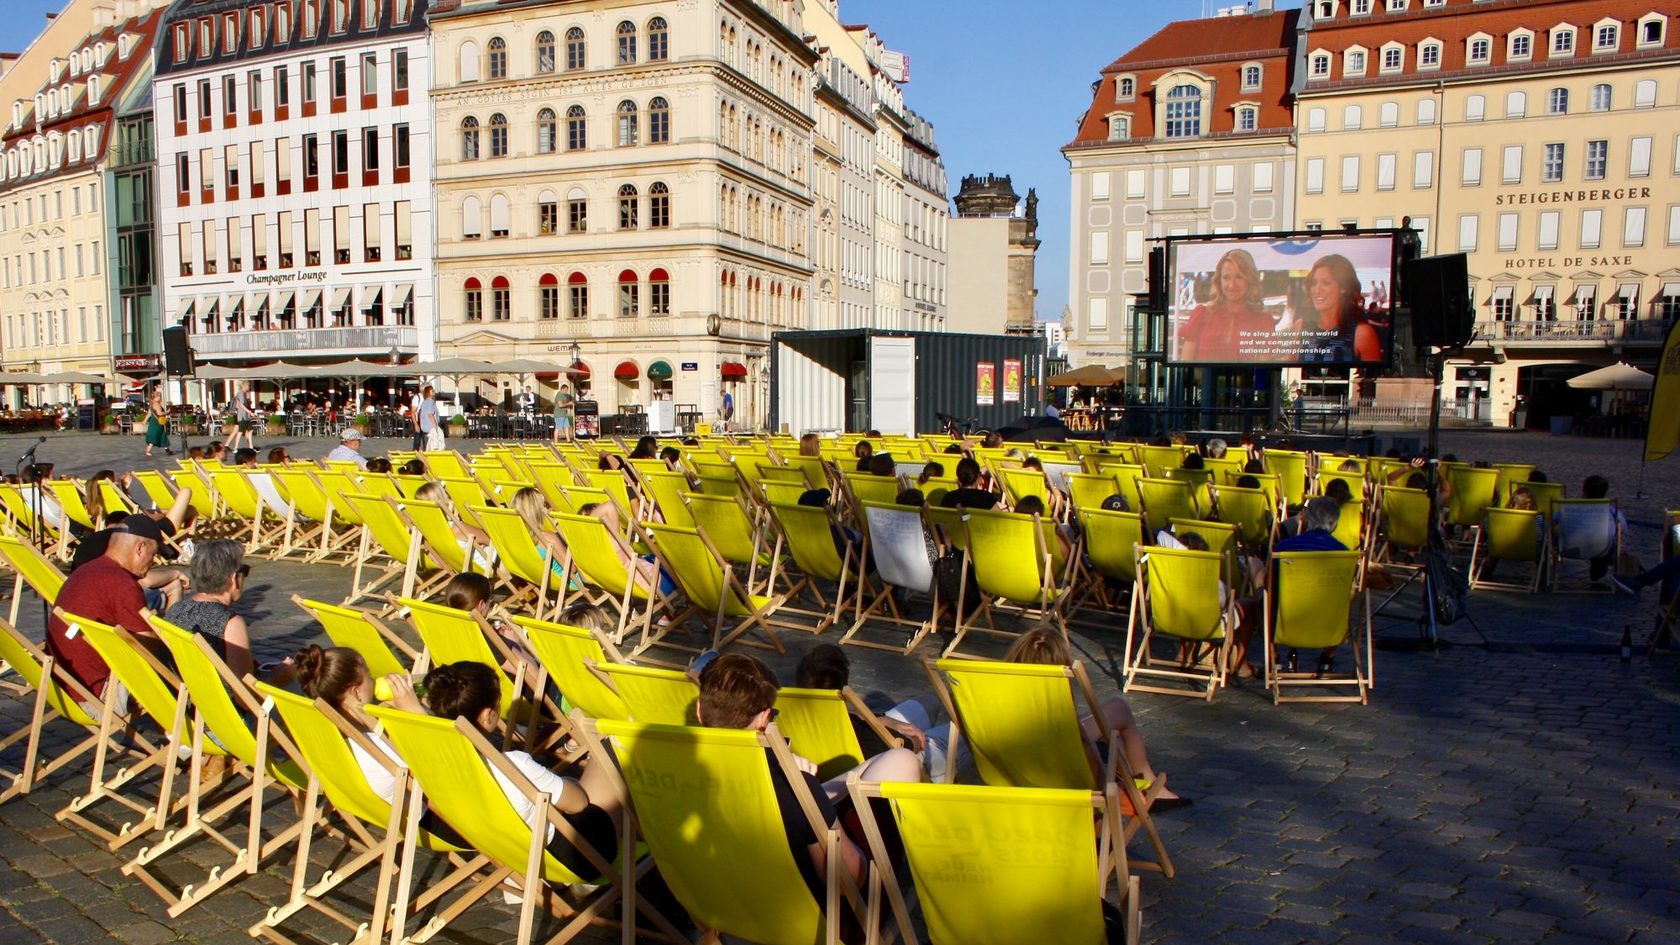 Numerous people are sitting in deck chairs on Dresden's Neumarkt square watching a movie on a mobile cinema screen.